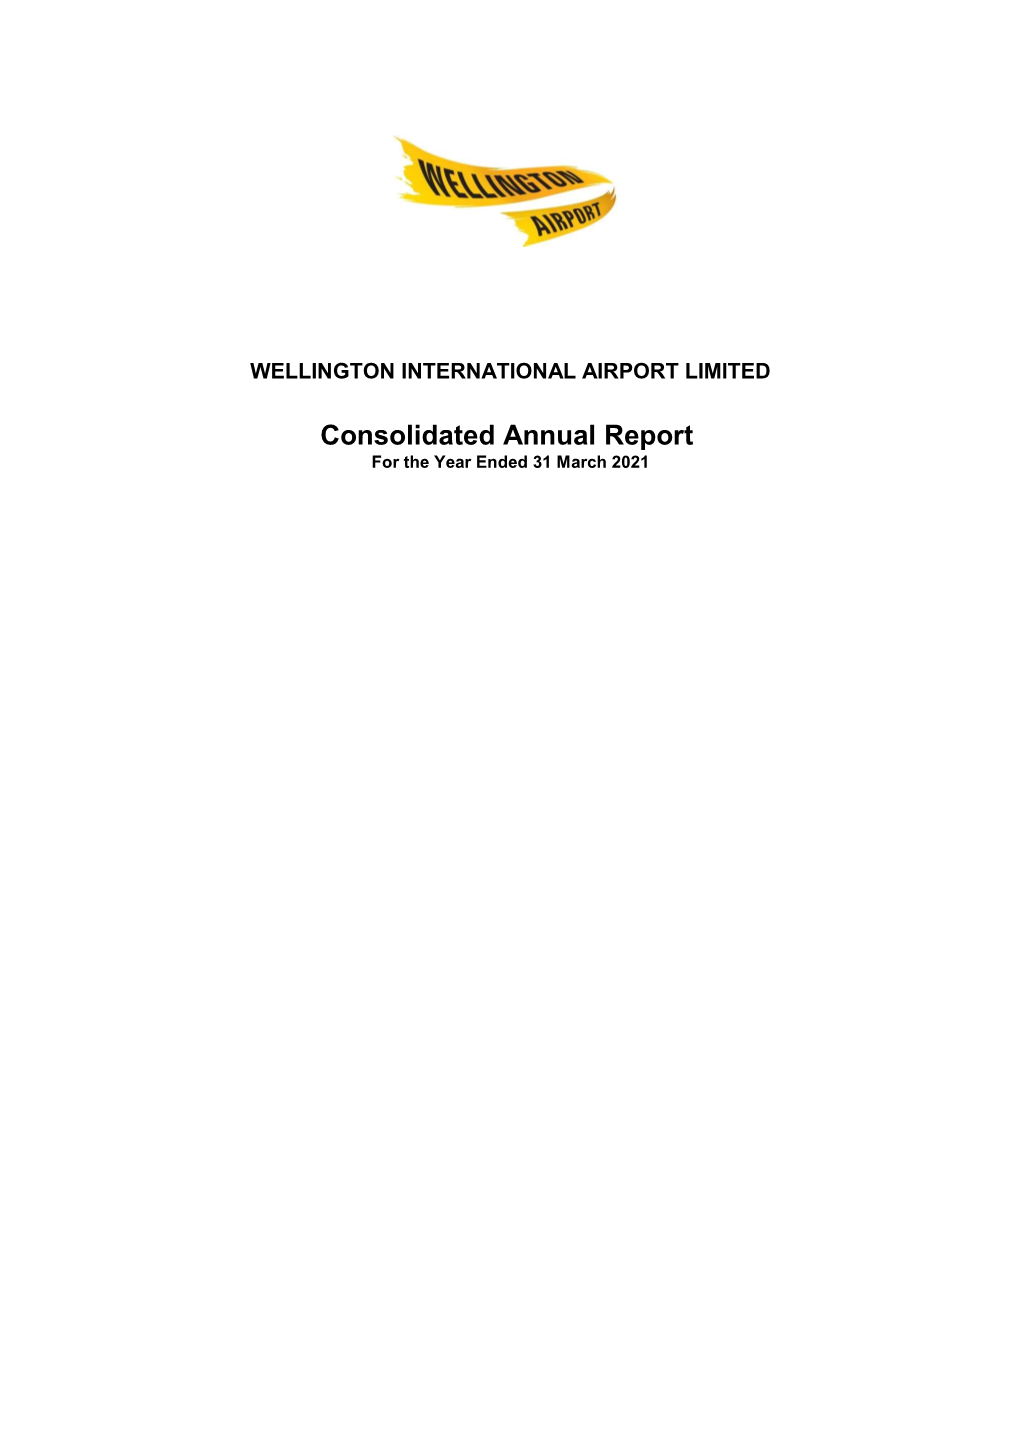 WIAL FY21 Annual Report